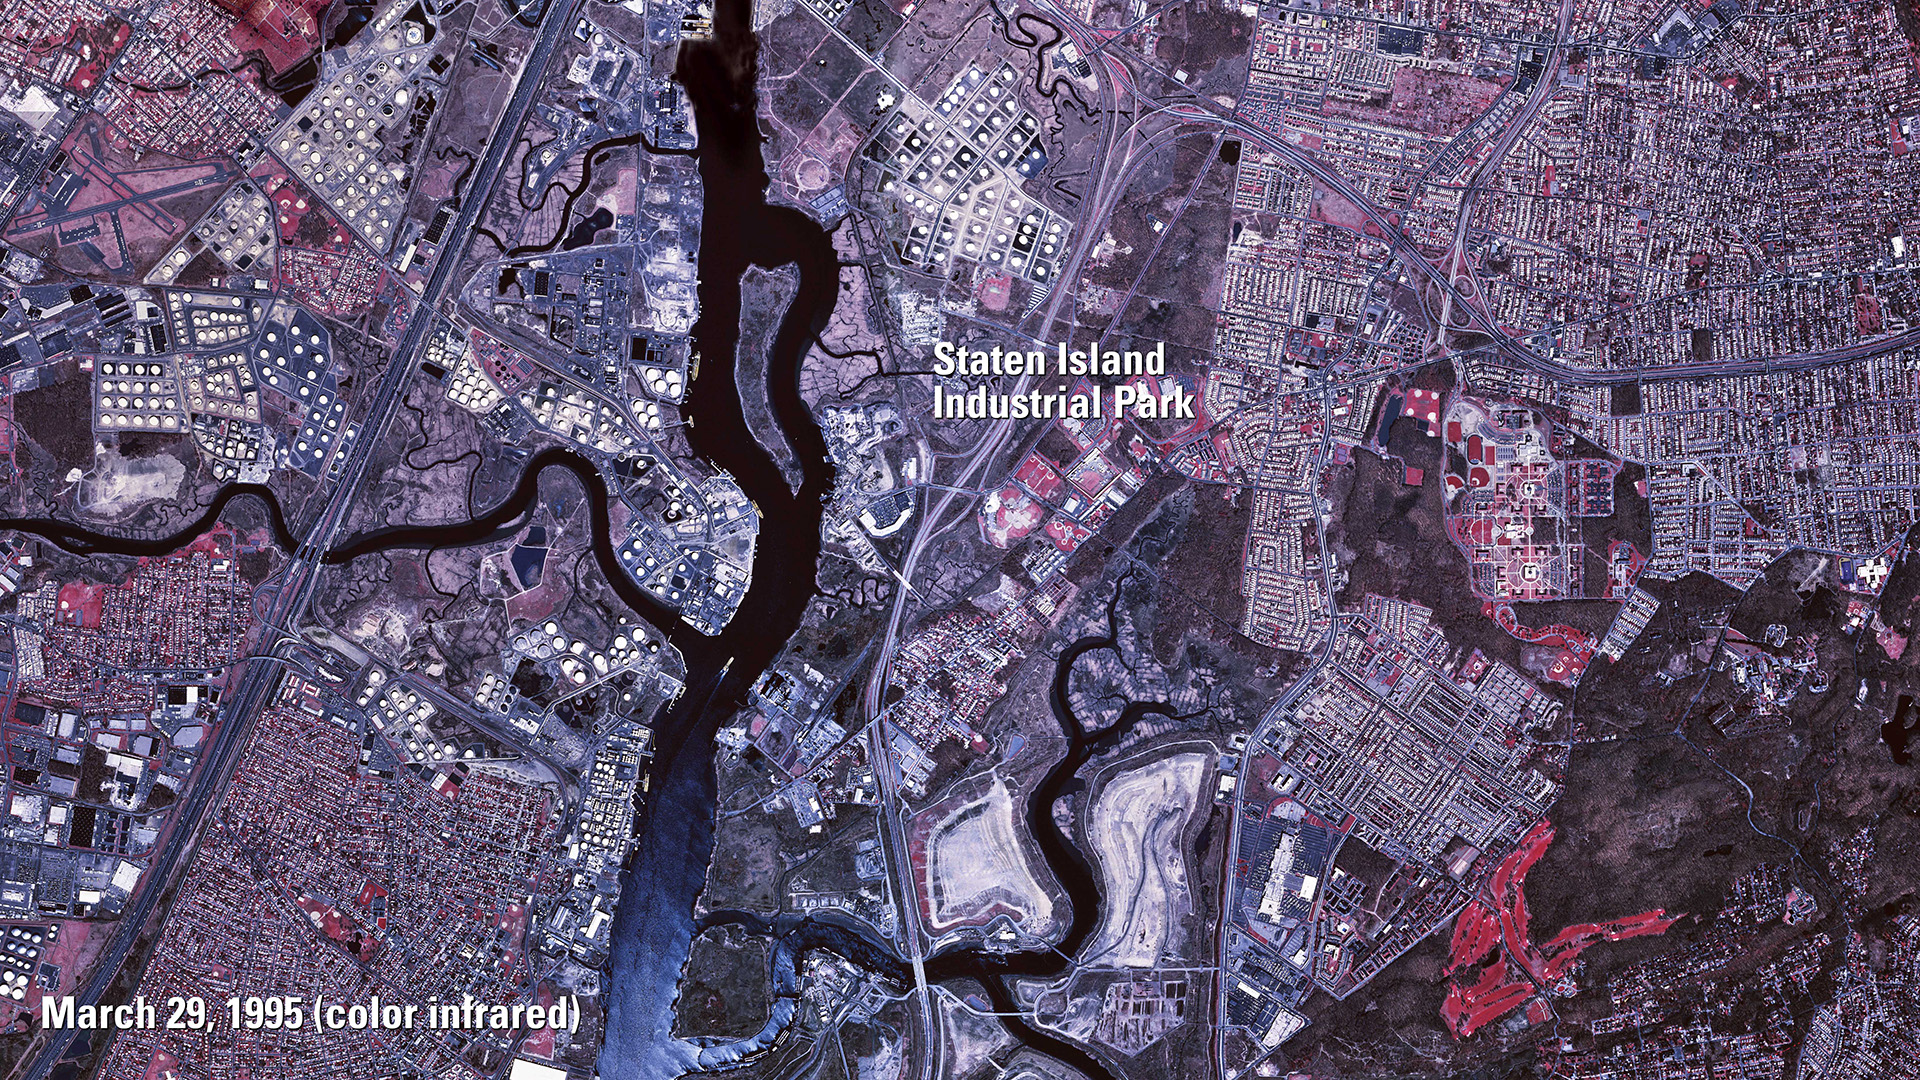 1995 image of Staten Island Industrial Park